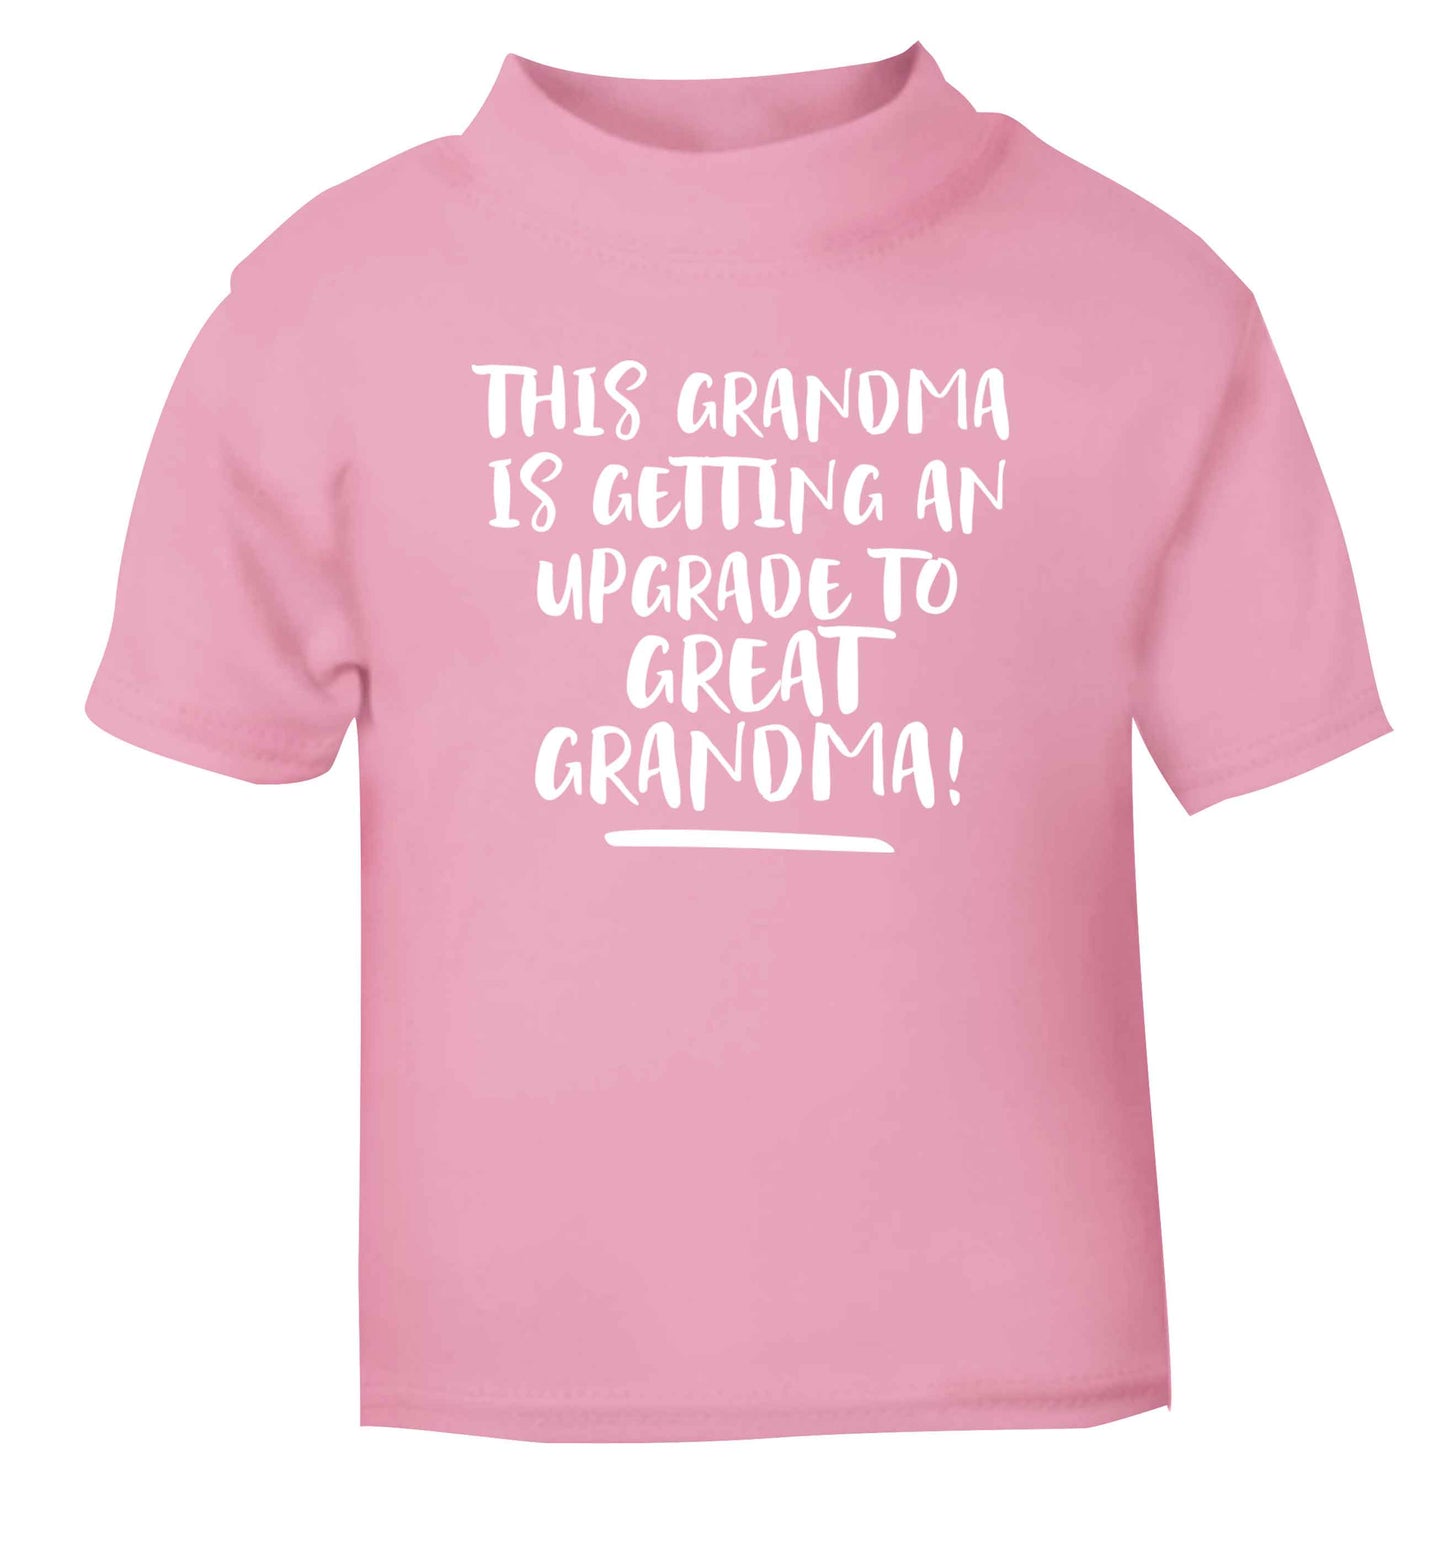 This grandma is getting an upgrade to great grandma! light pink Baby Toddler Tshirt 2 Years